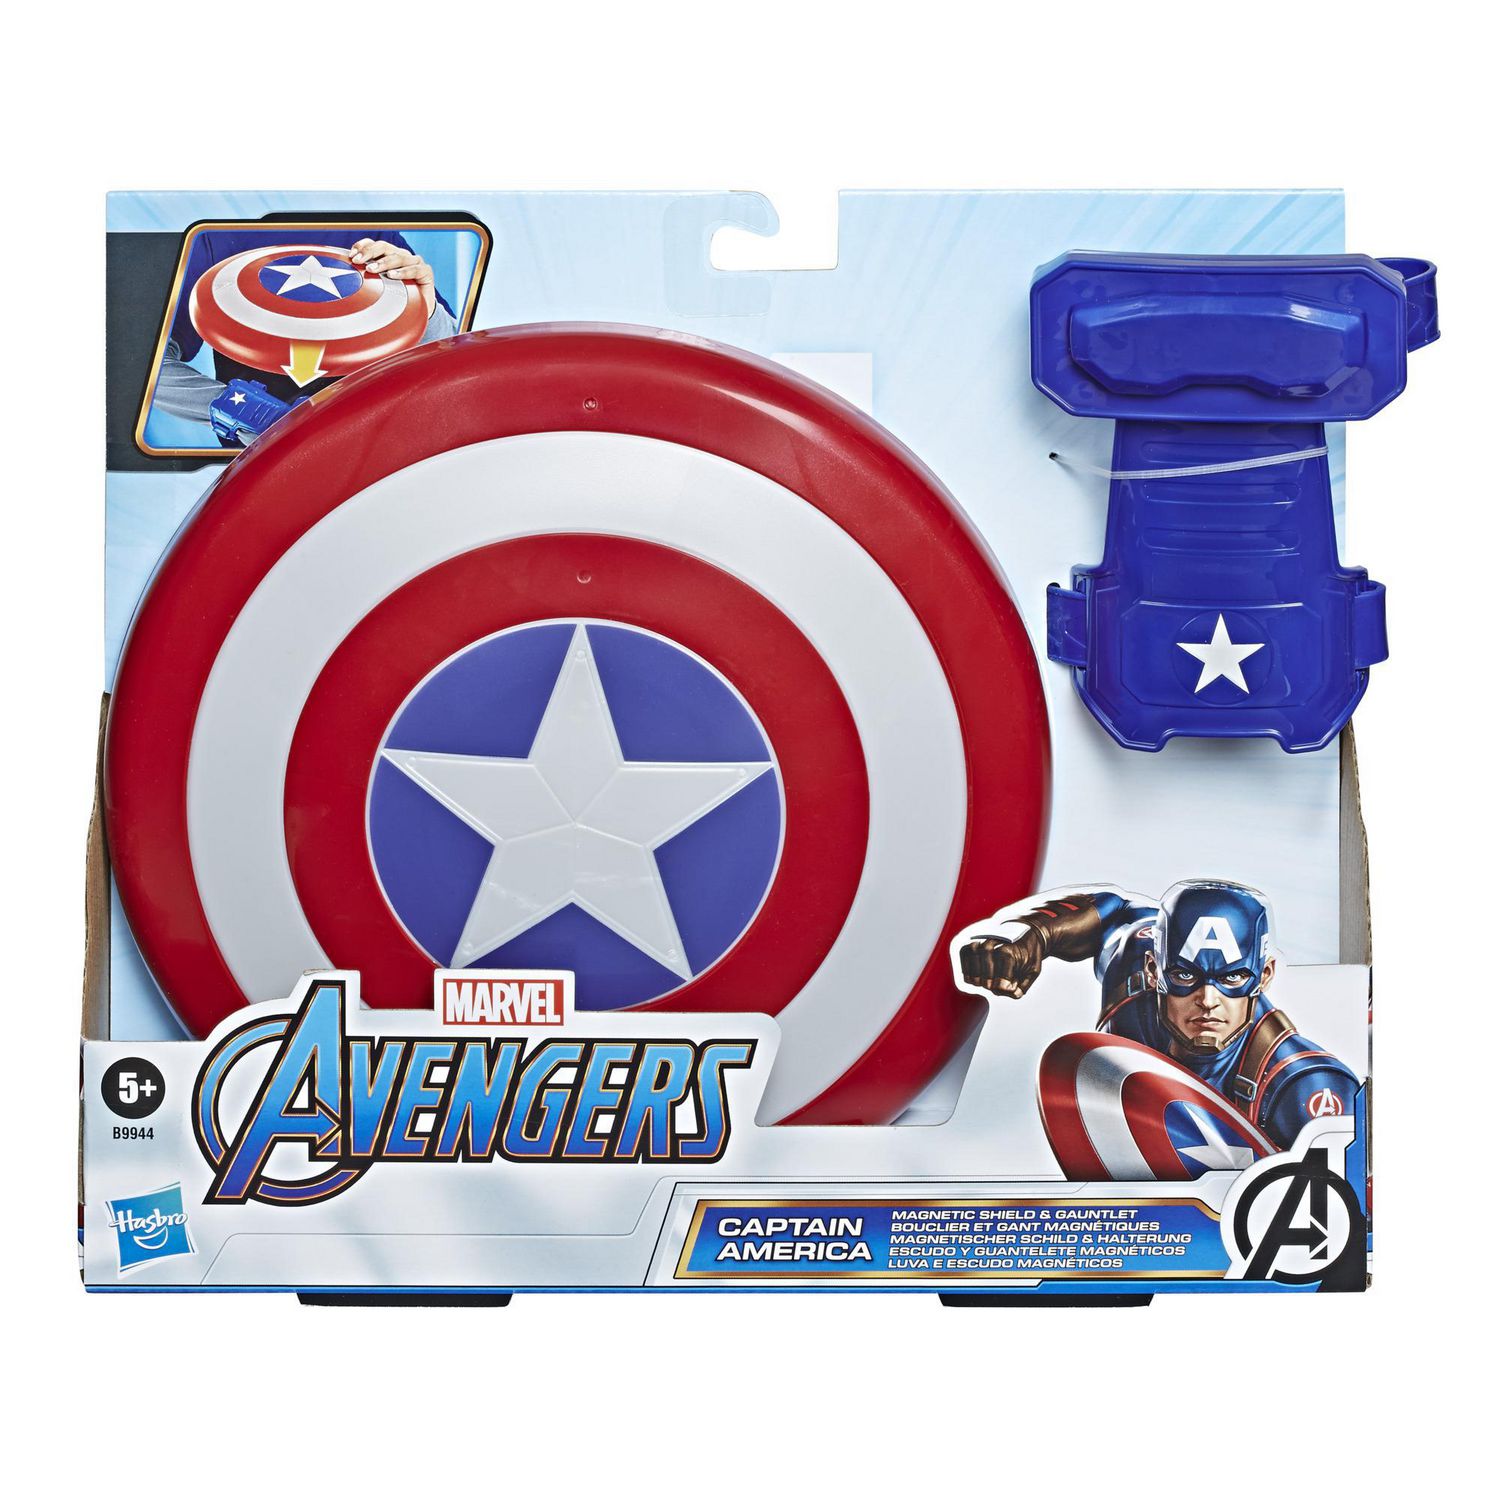 Marvel Avengers Captain America Blast Magnetic Shield and Gauntlet Toy,  Shield Attaches to Gauntlet, Avengers Role Play Toy, For Kids Ages 5 And Up  